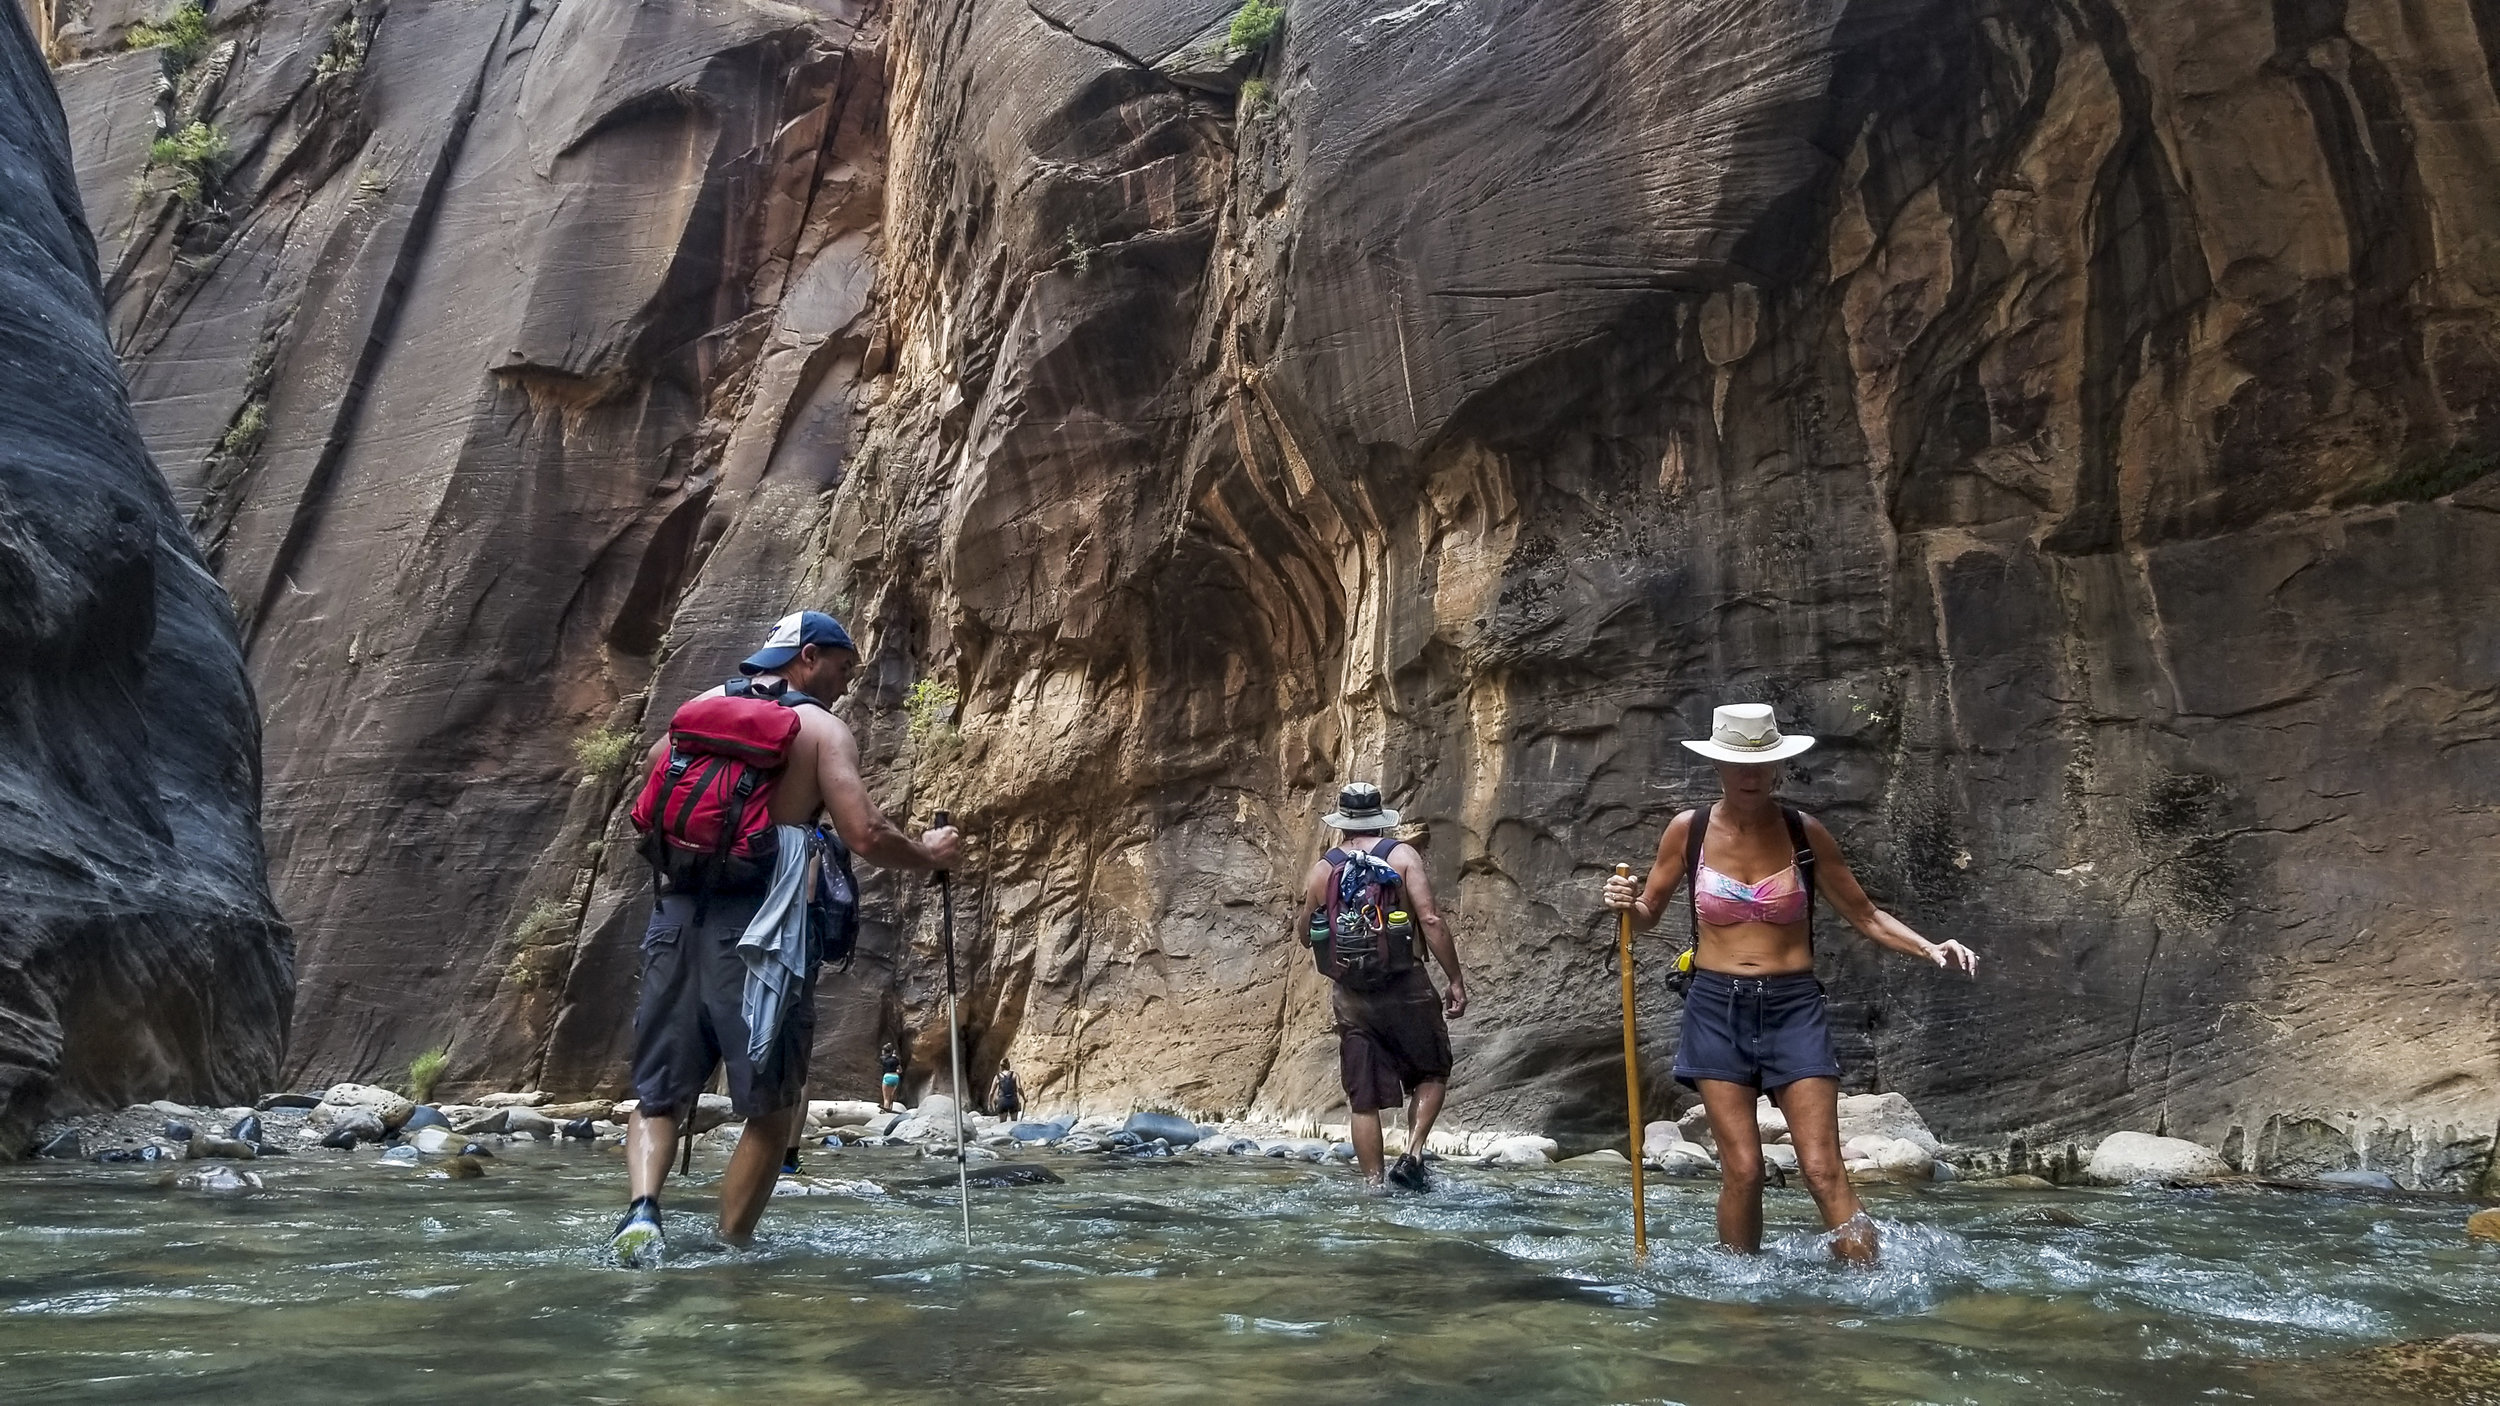  Zion National Park visitors walk along The Narrows, a river hike through the Virgin River, at Zion National Park in Utah on Friday, July 14, 2017.  Patrick Connolly Las Vegas Review-Journal @PConnPie 